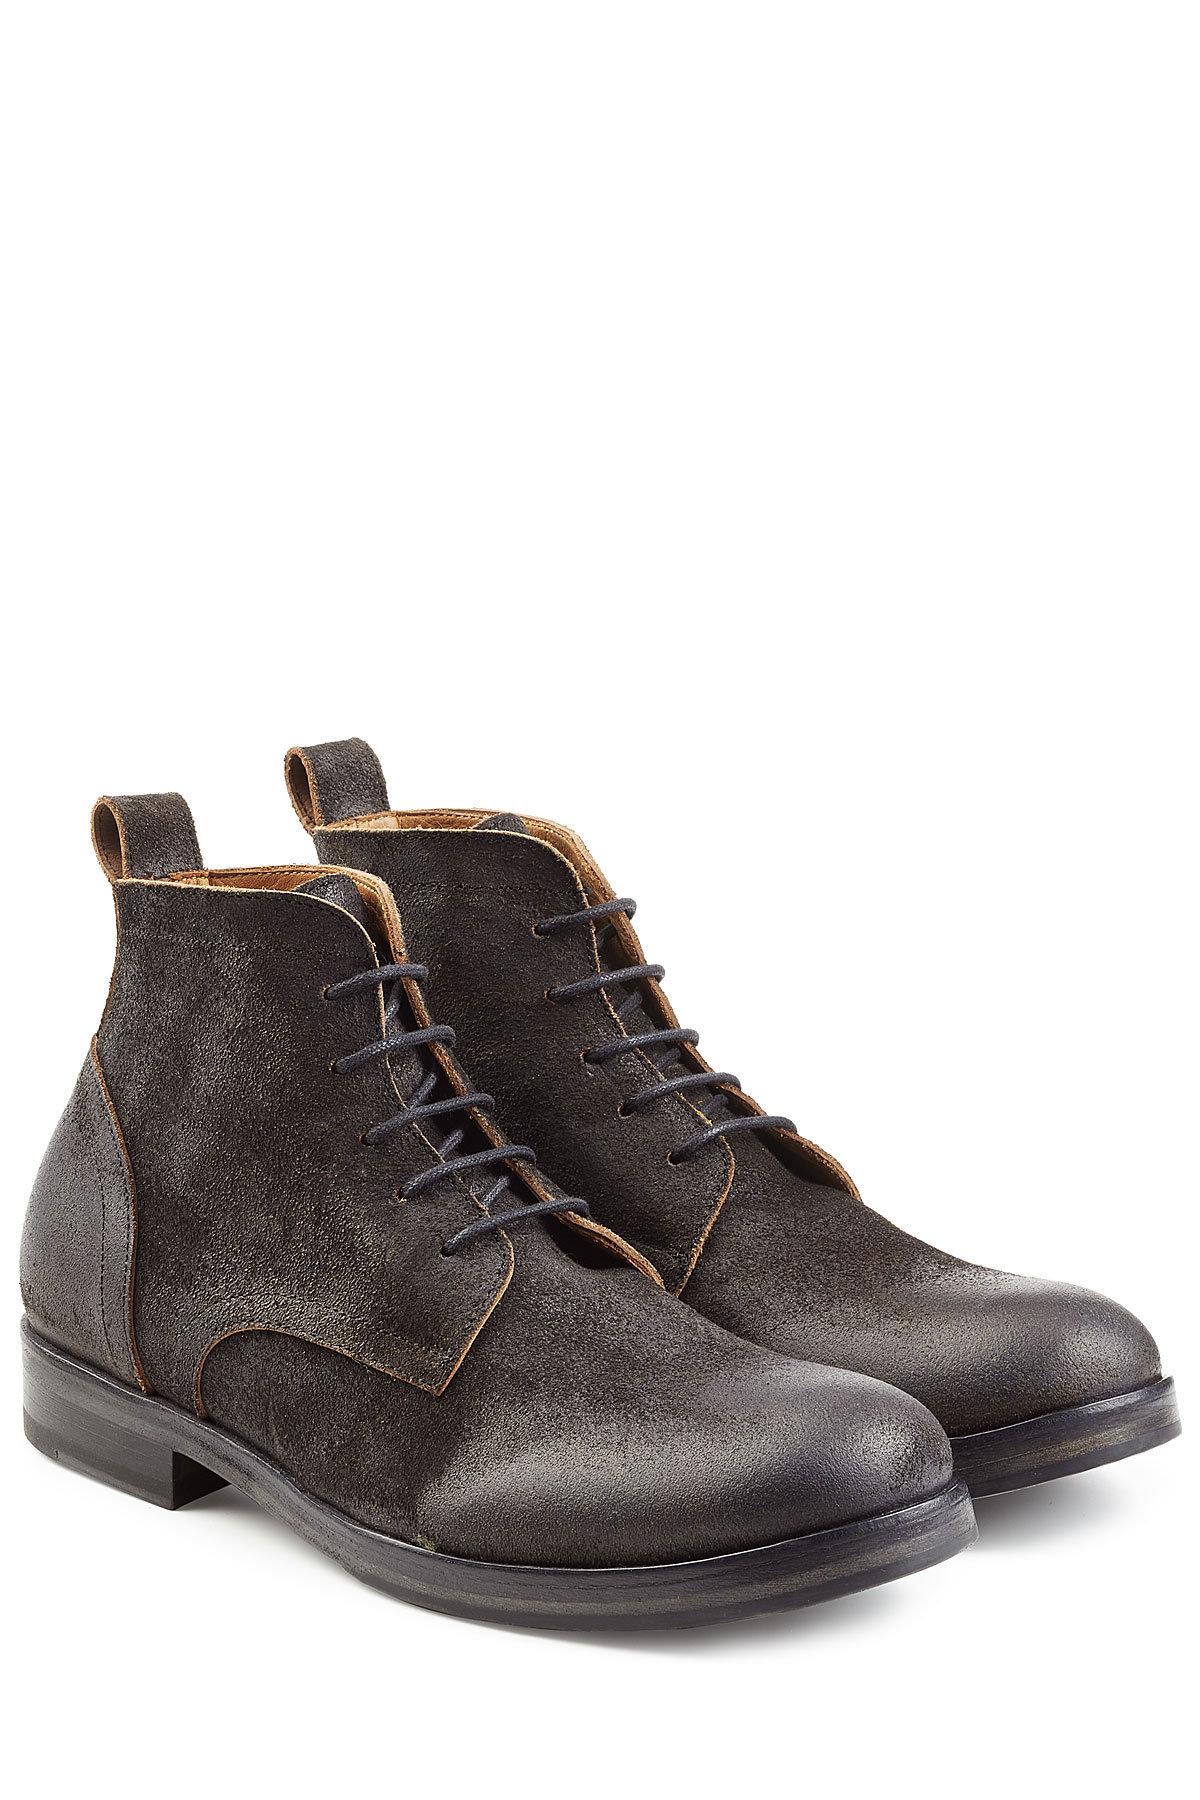 Fiorentini + Baker - Distressed Sueded Ankle Boots